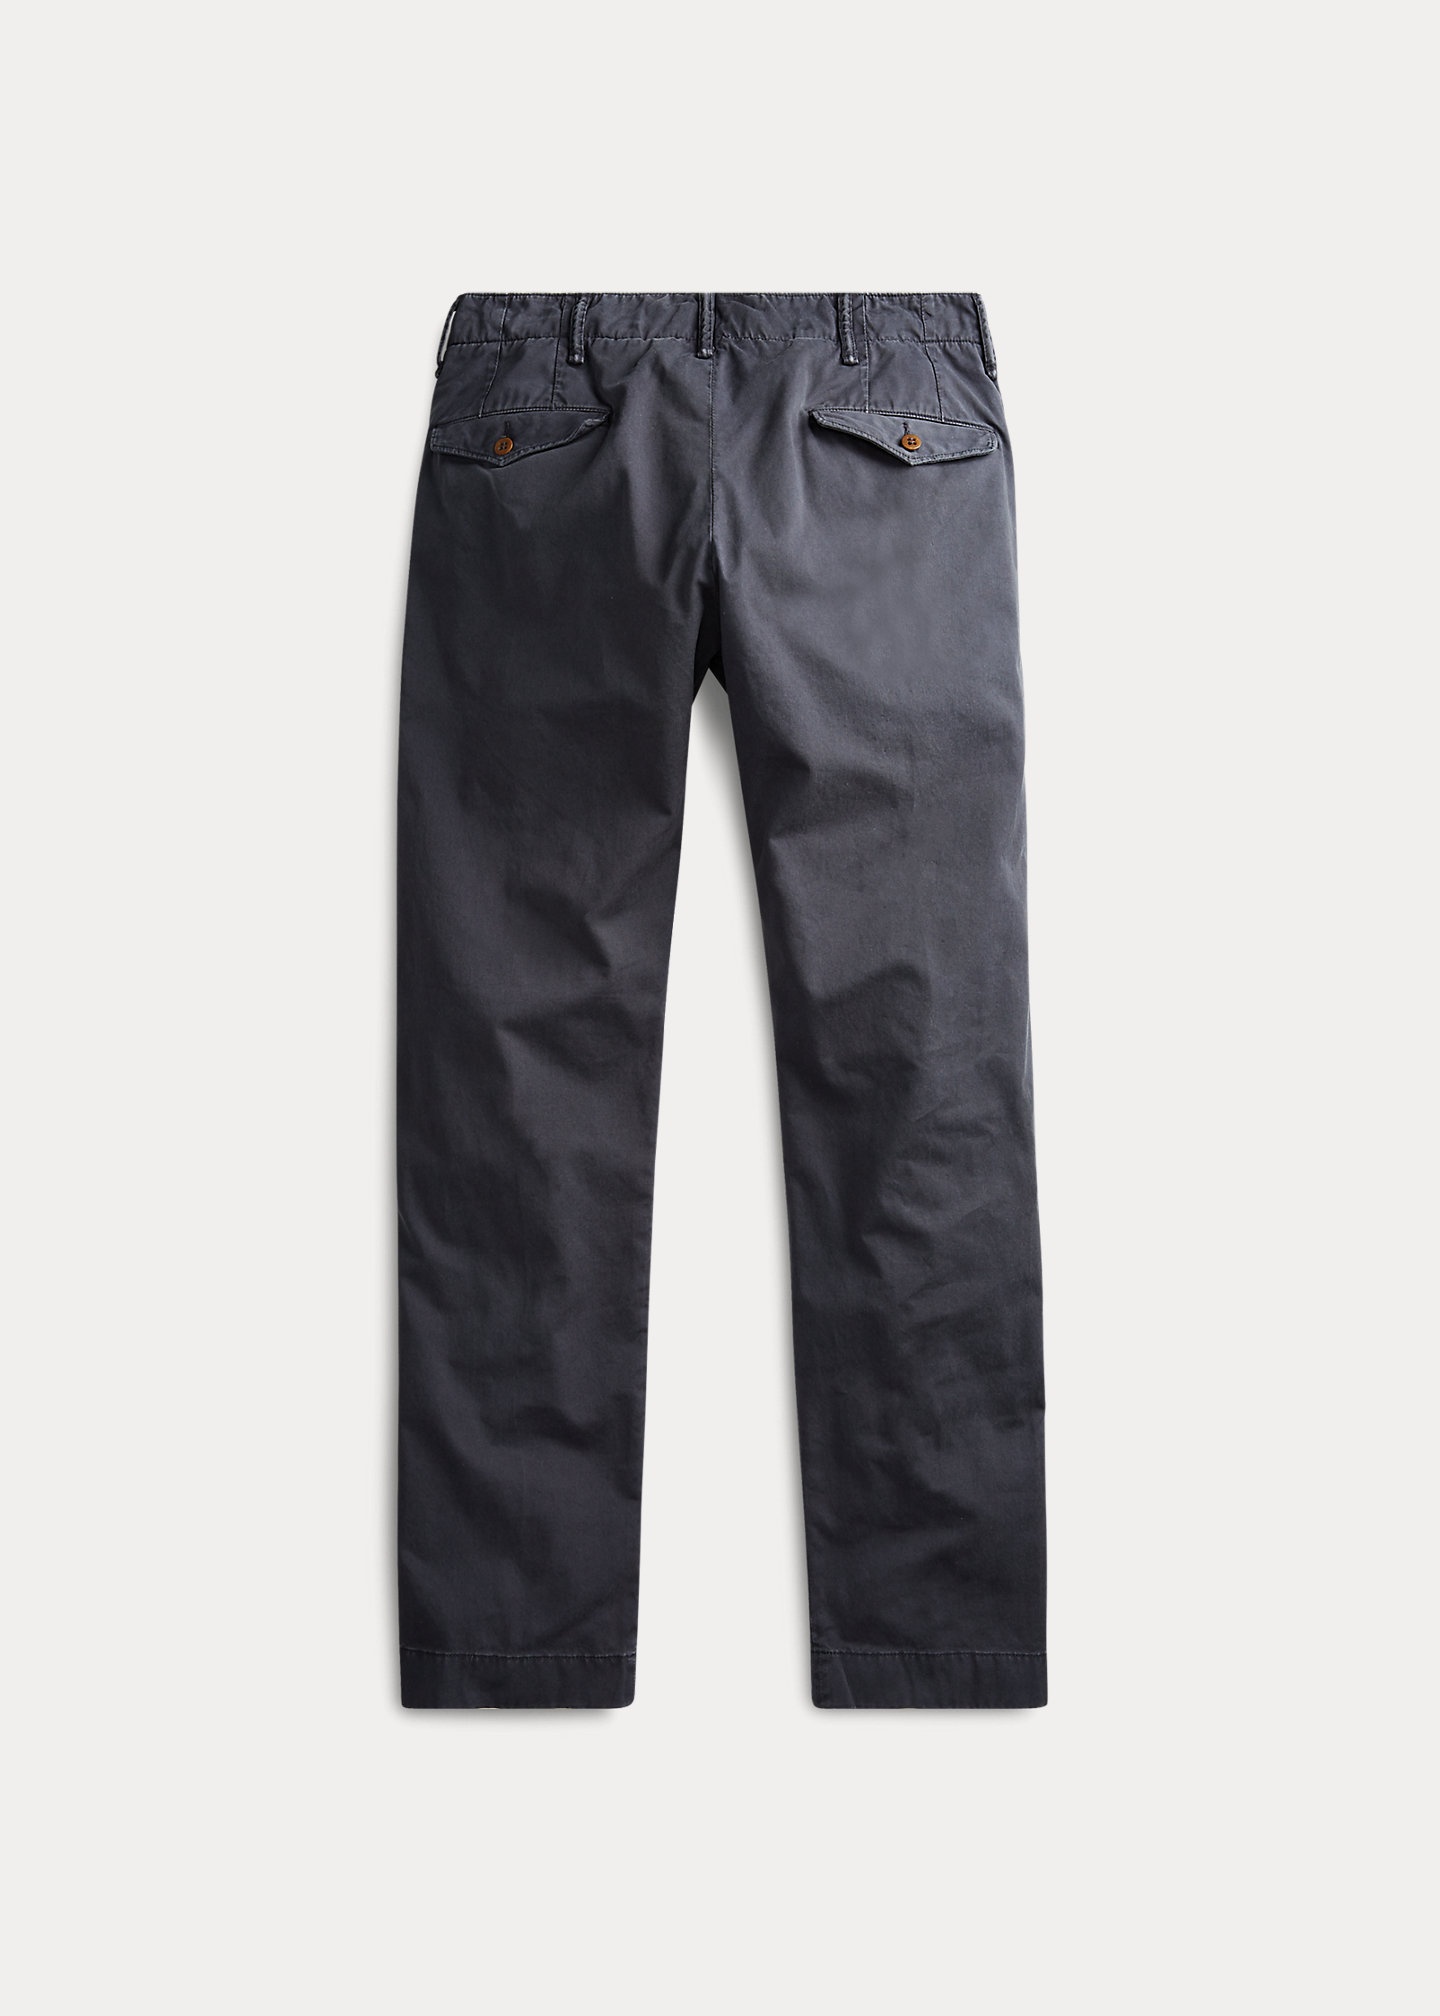 Officer’s Chino Pant - 2